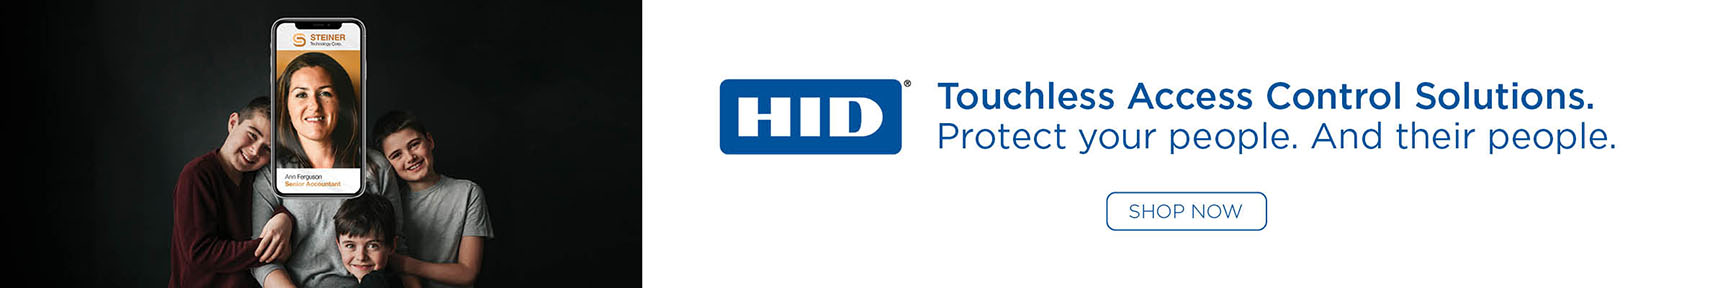 HID Touchless